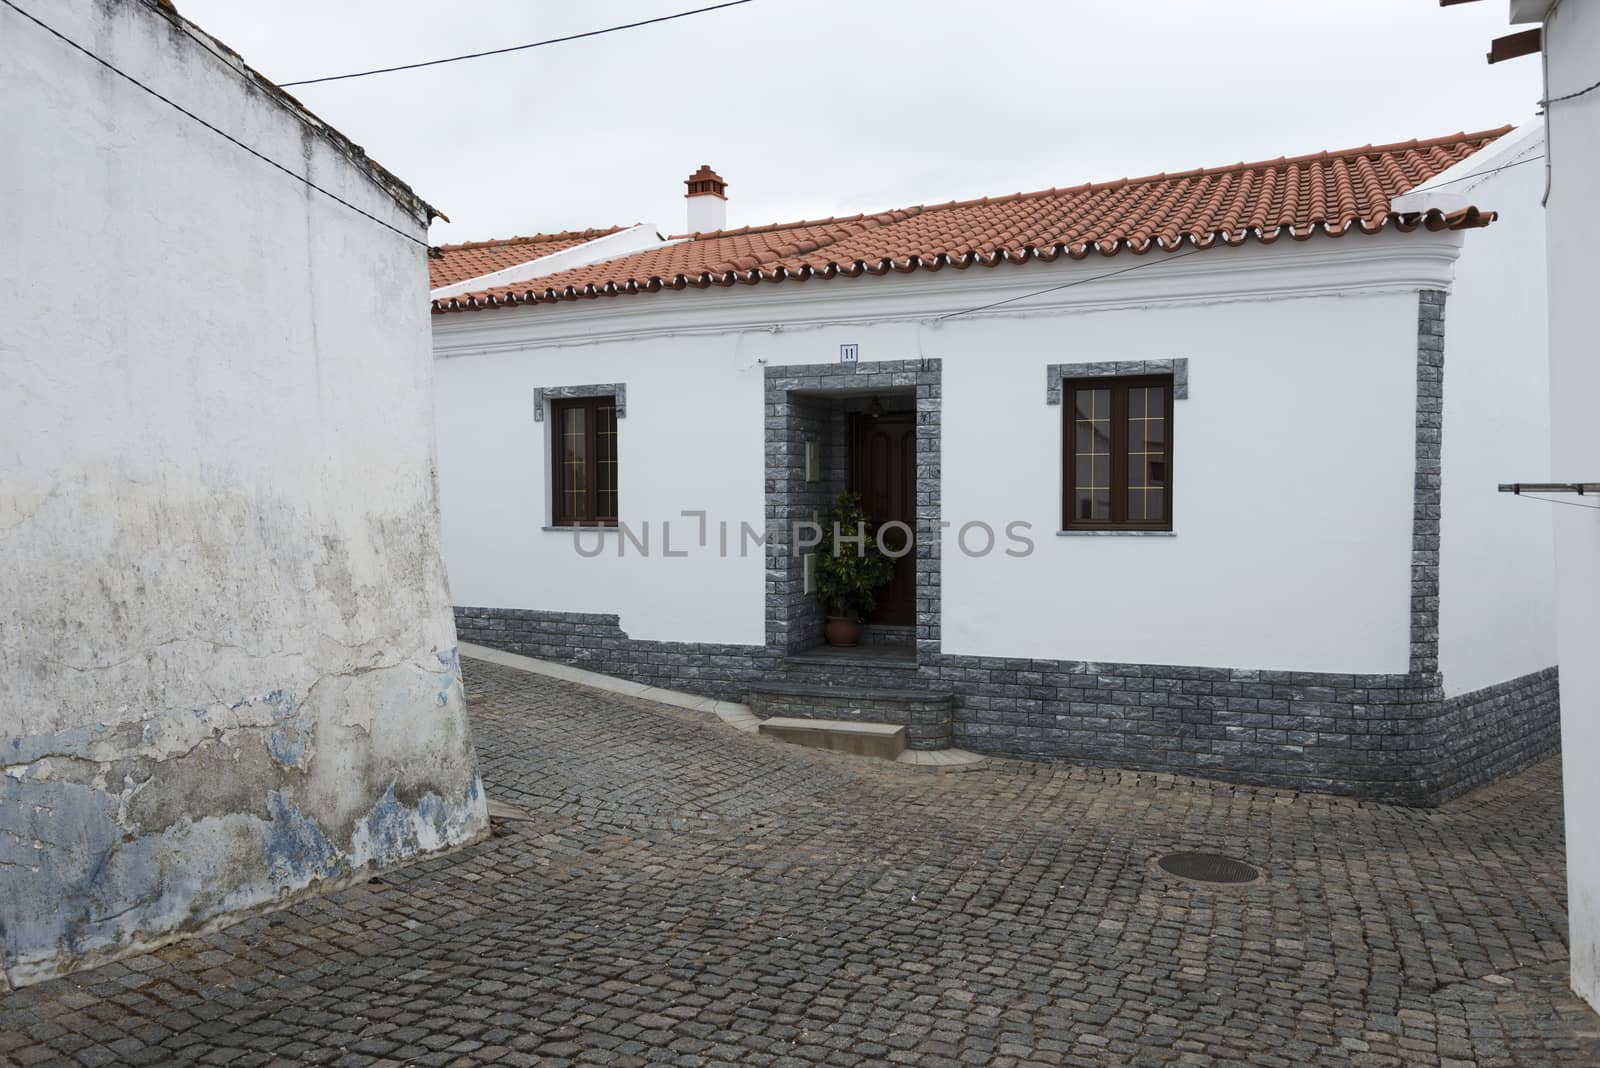 typical old house in moura a city in alentejo area portugal